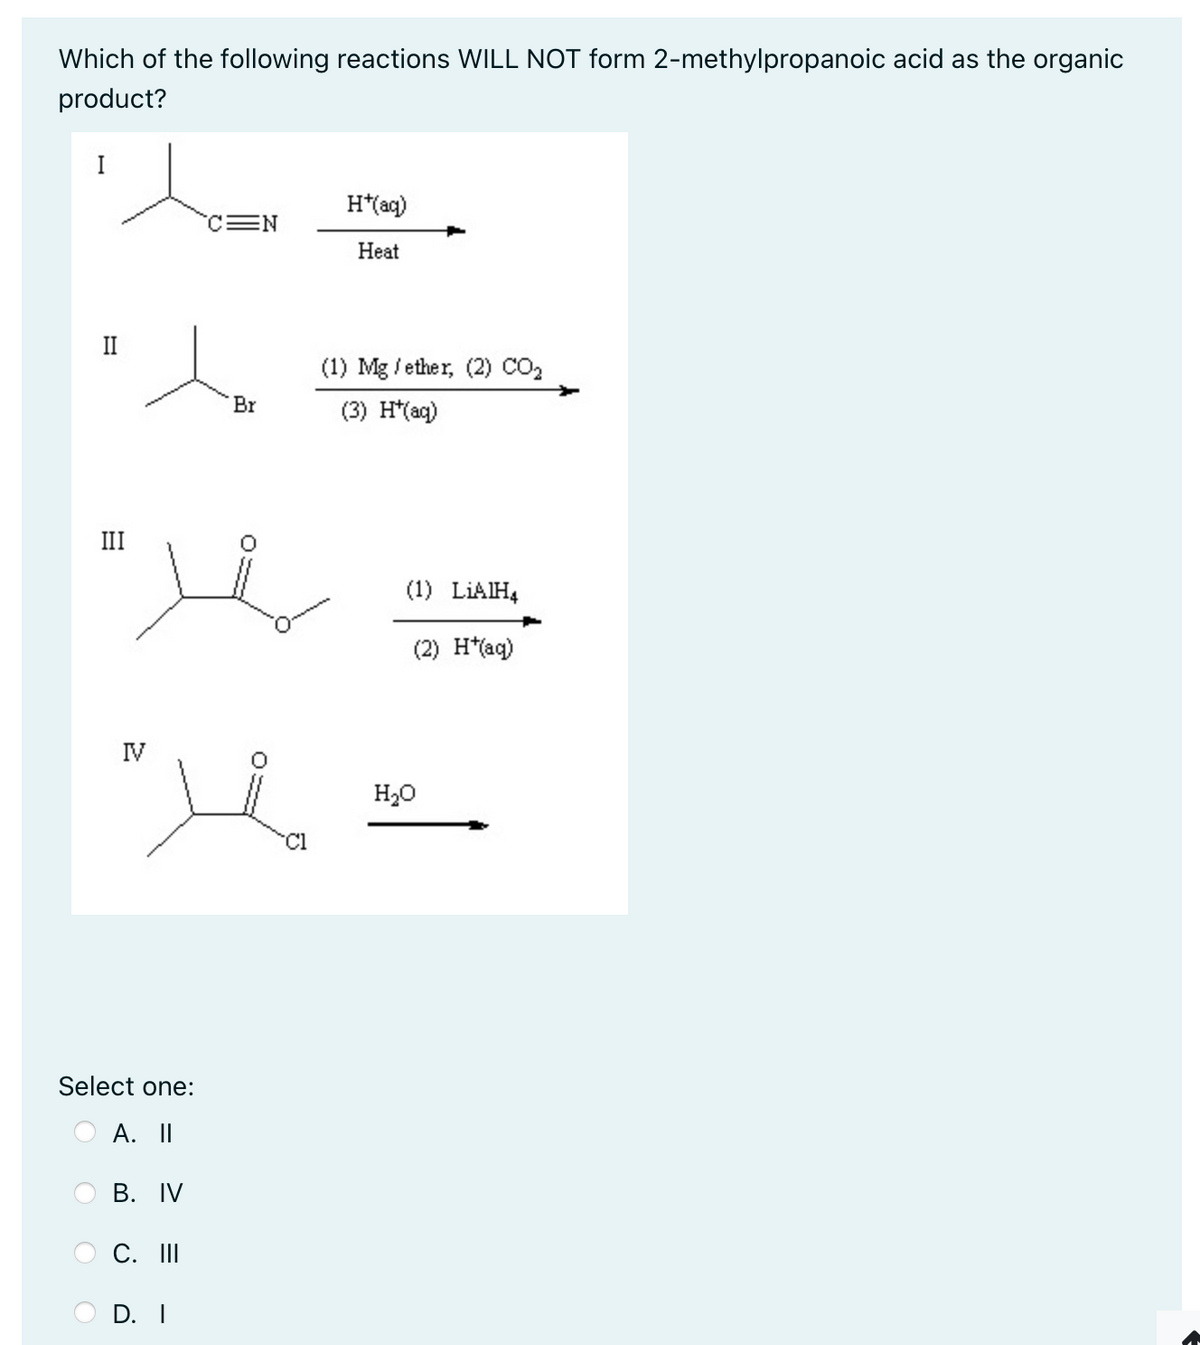 Which of the following reactions WILL NOT form 2-methylpropanoic acid as the organic
product?
H*(aq)
EN
Heat
II
(1) Mg/ether, (2) CO₂
Br
(3) H*(aq)
III
(1) LIAIH4
(2) H*(aq)
IV
Select one:
A. II
B. IV
C. III
D. I
Cl
H₂O